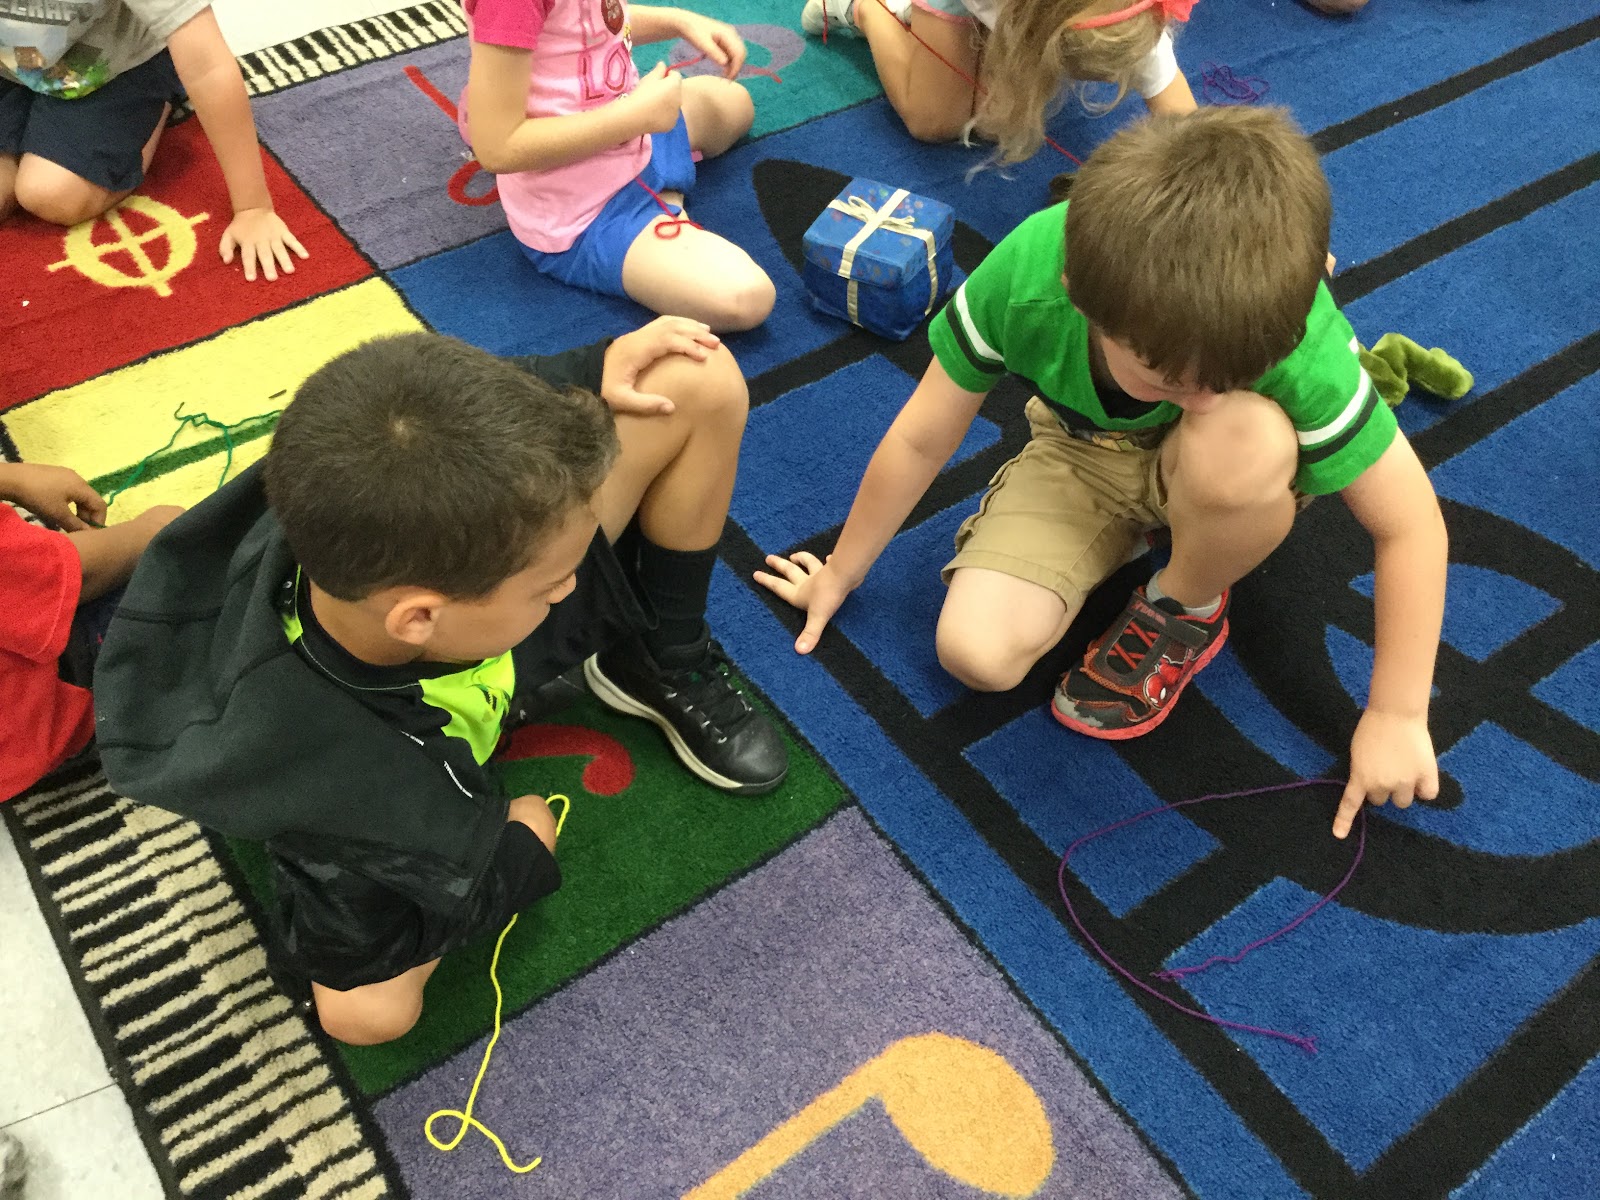 Students use yarn to help with vocal practice